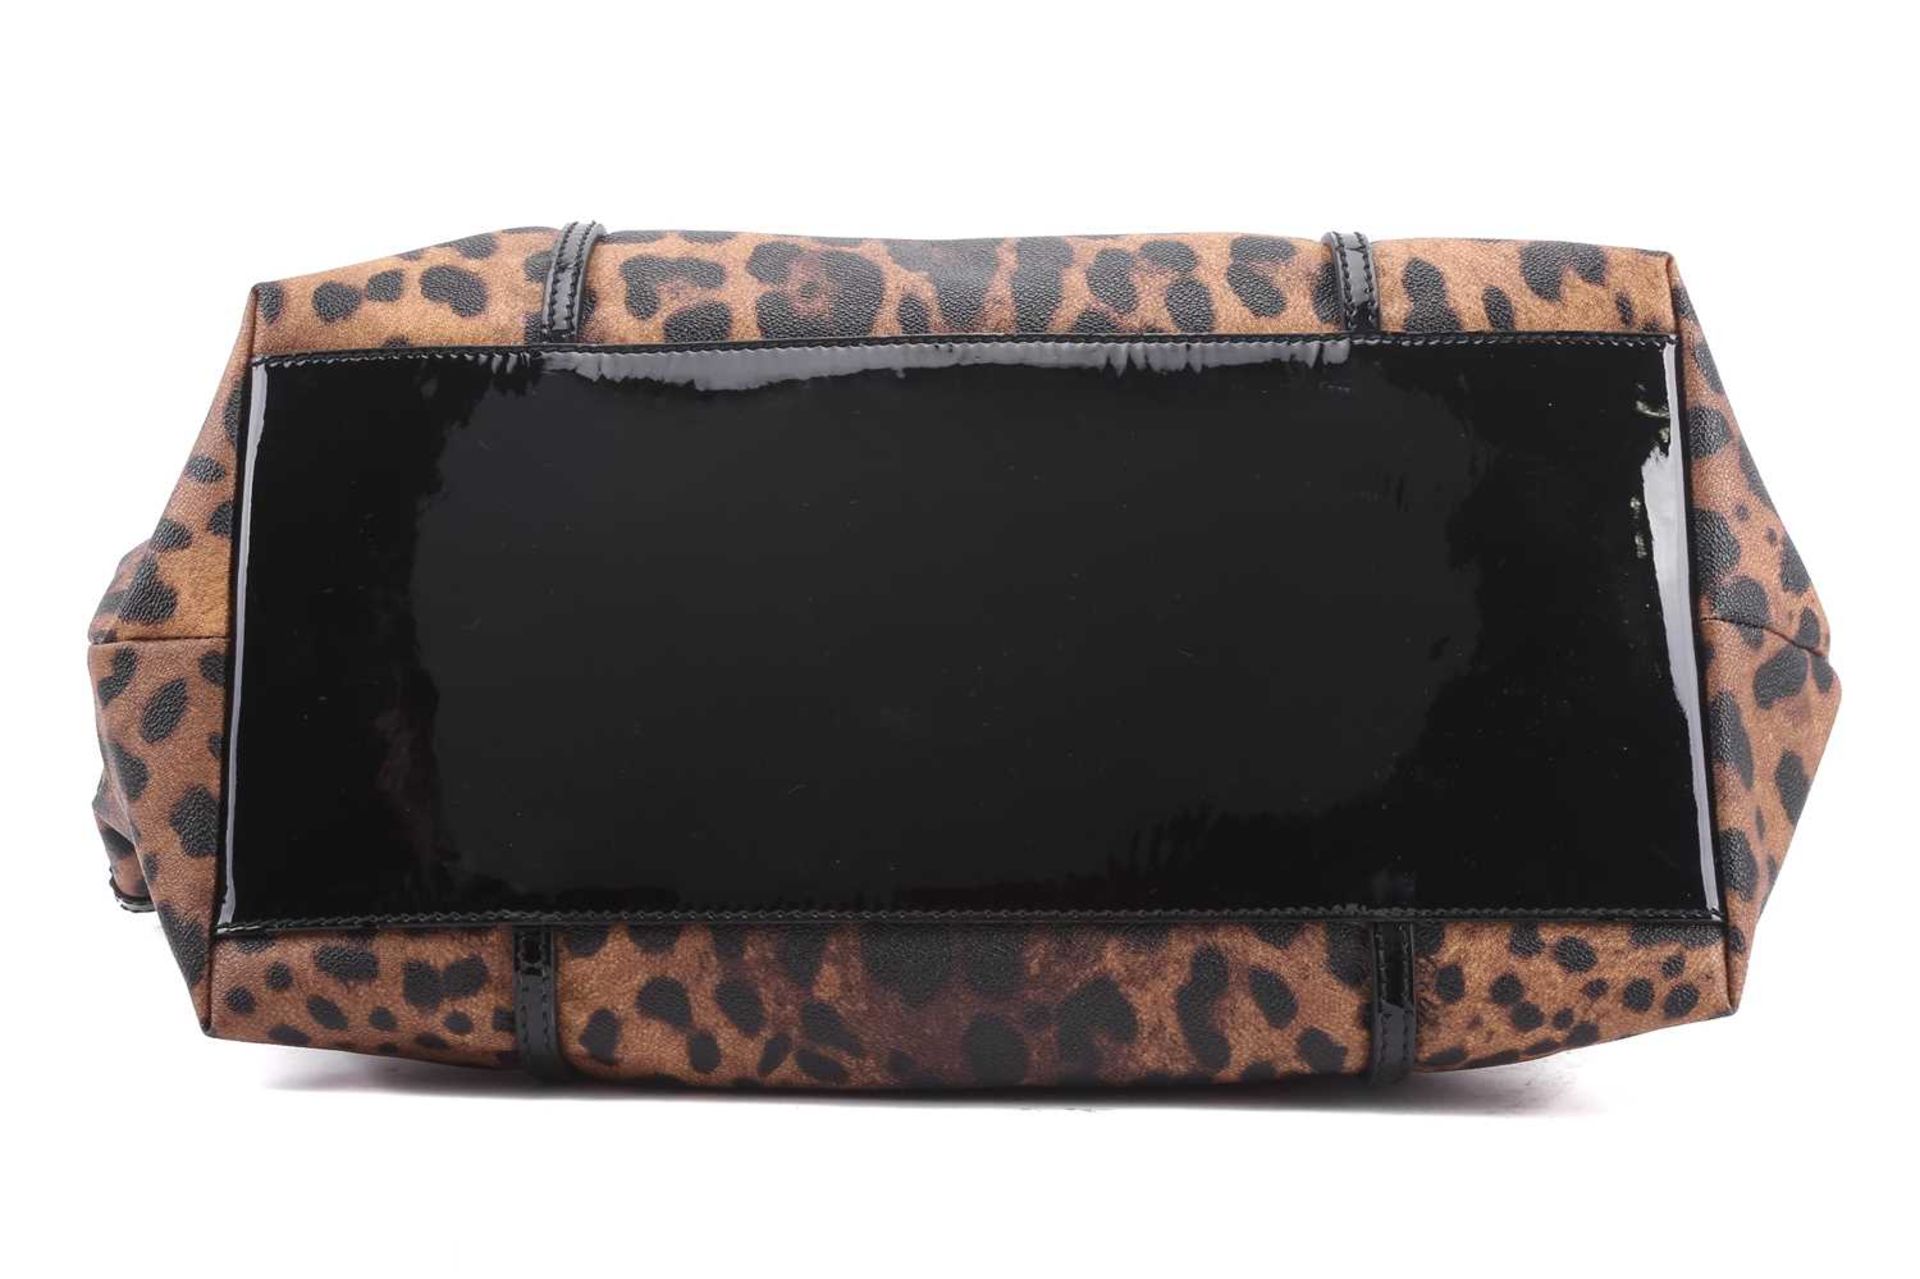 Dolce & Gabbana - a large leopard print 'Escape' shopper tote with black patent leather trims and - Image 5 of 13